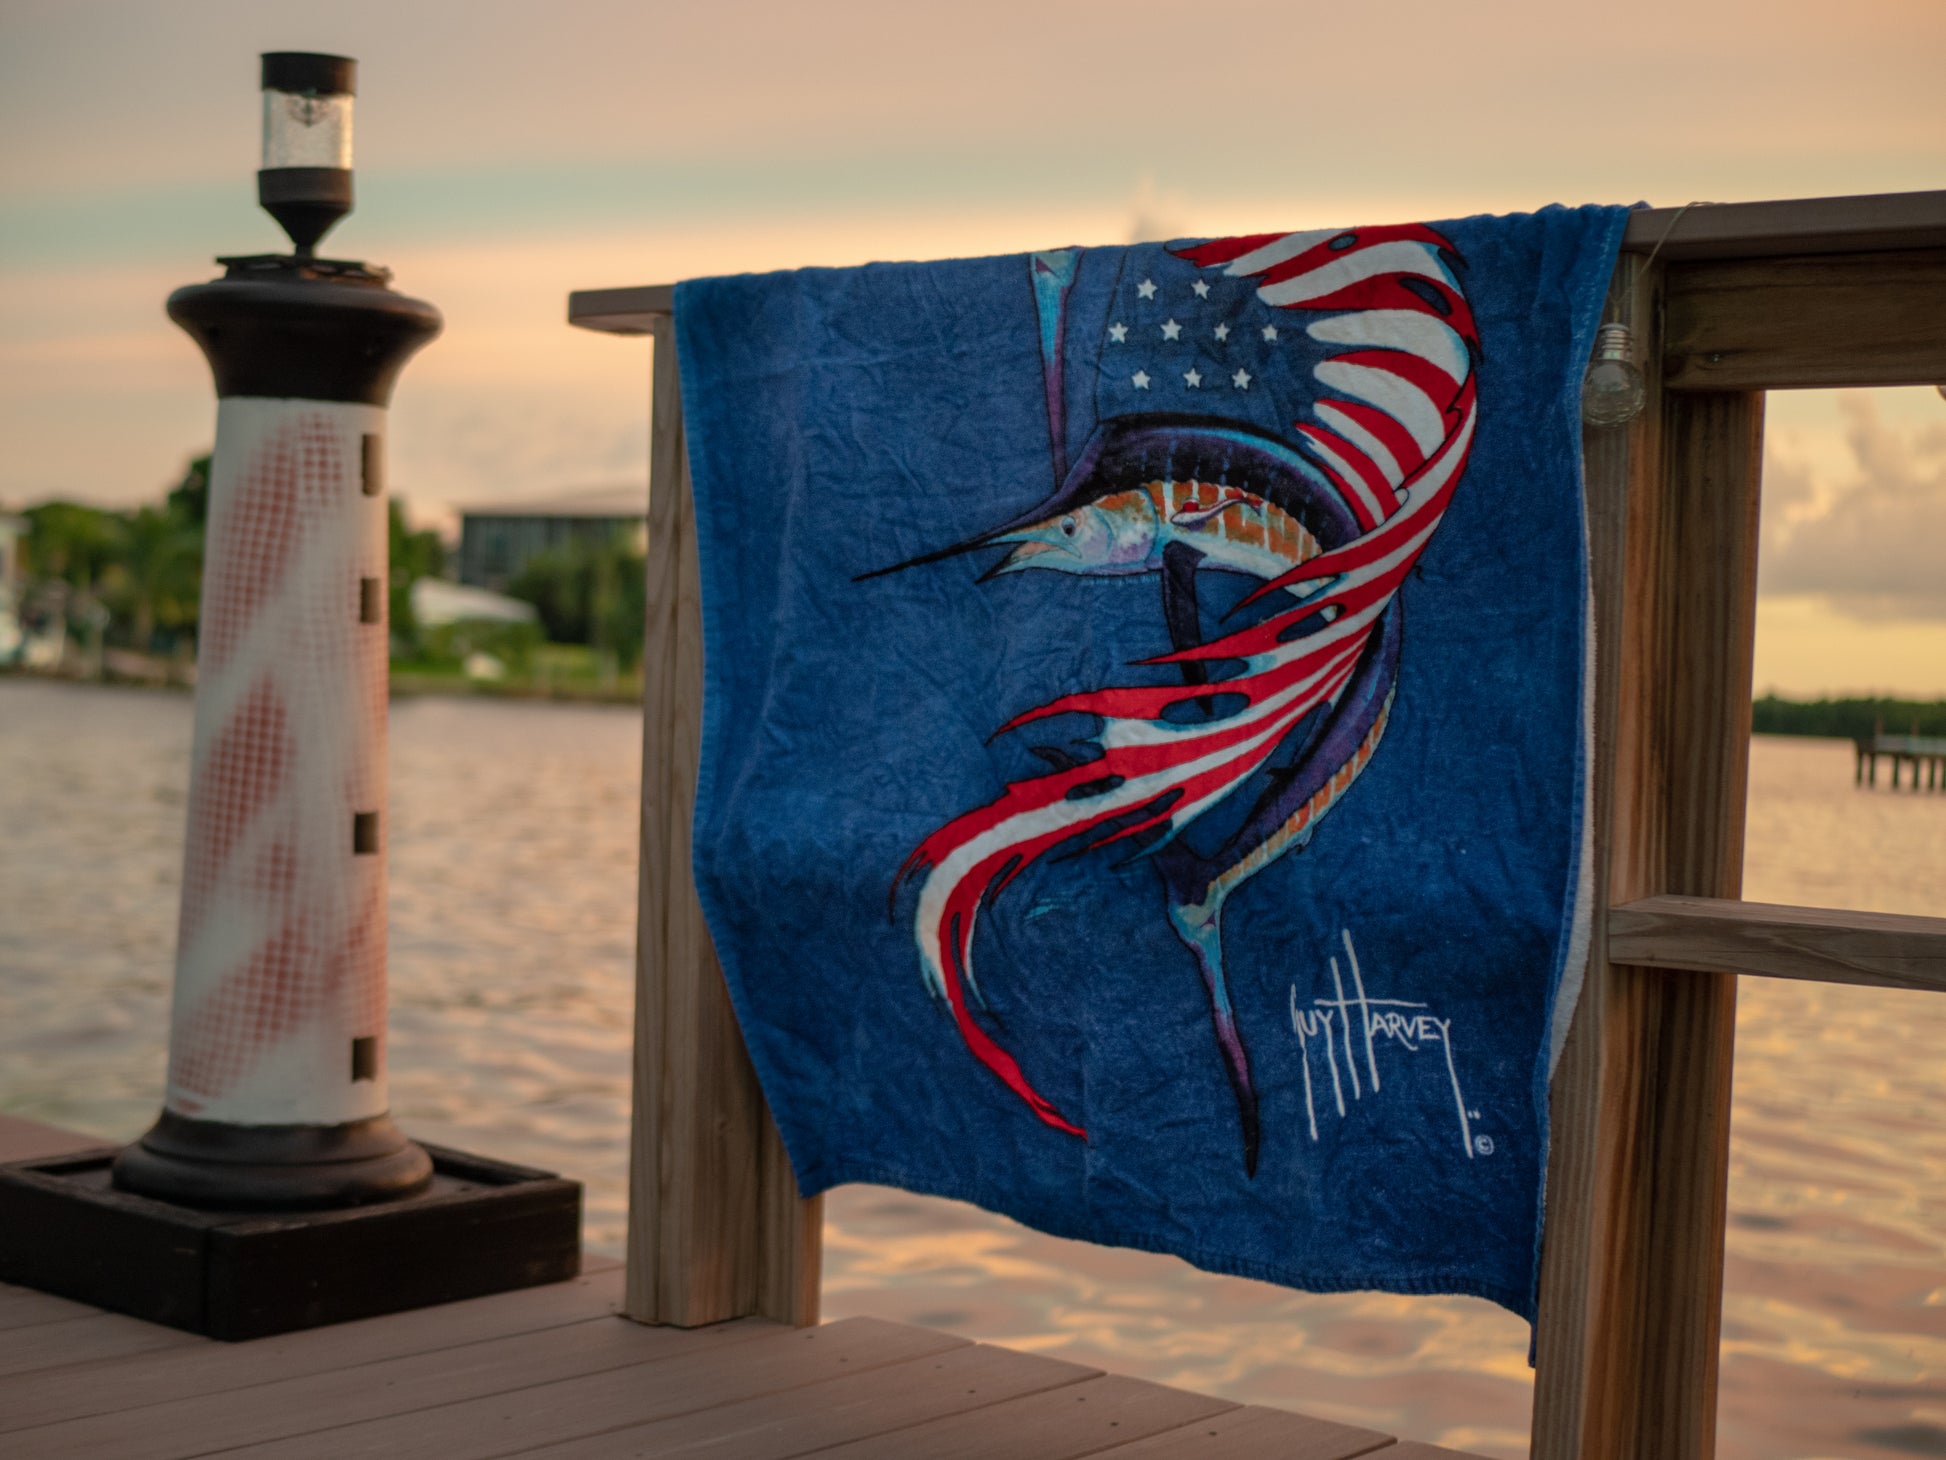 American Beach Holiday Sublimation Towels  American beaches, Beach  holiday, Sublime